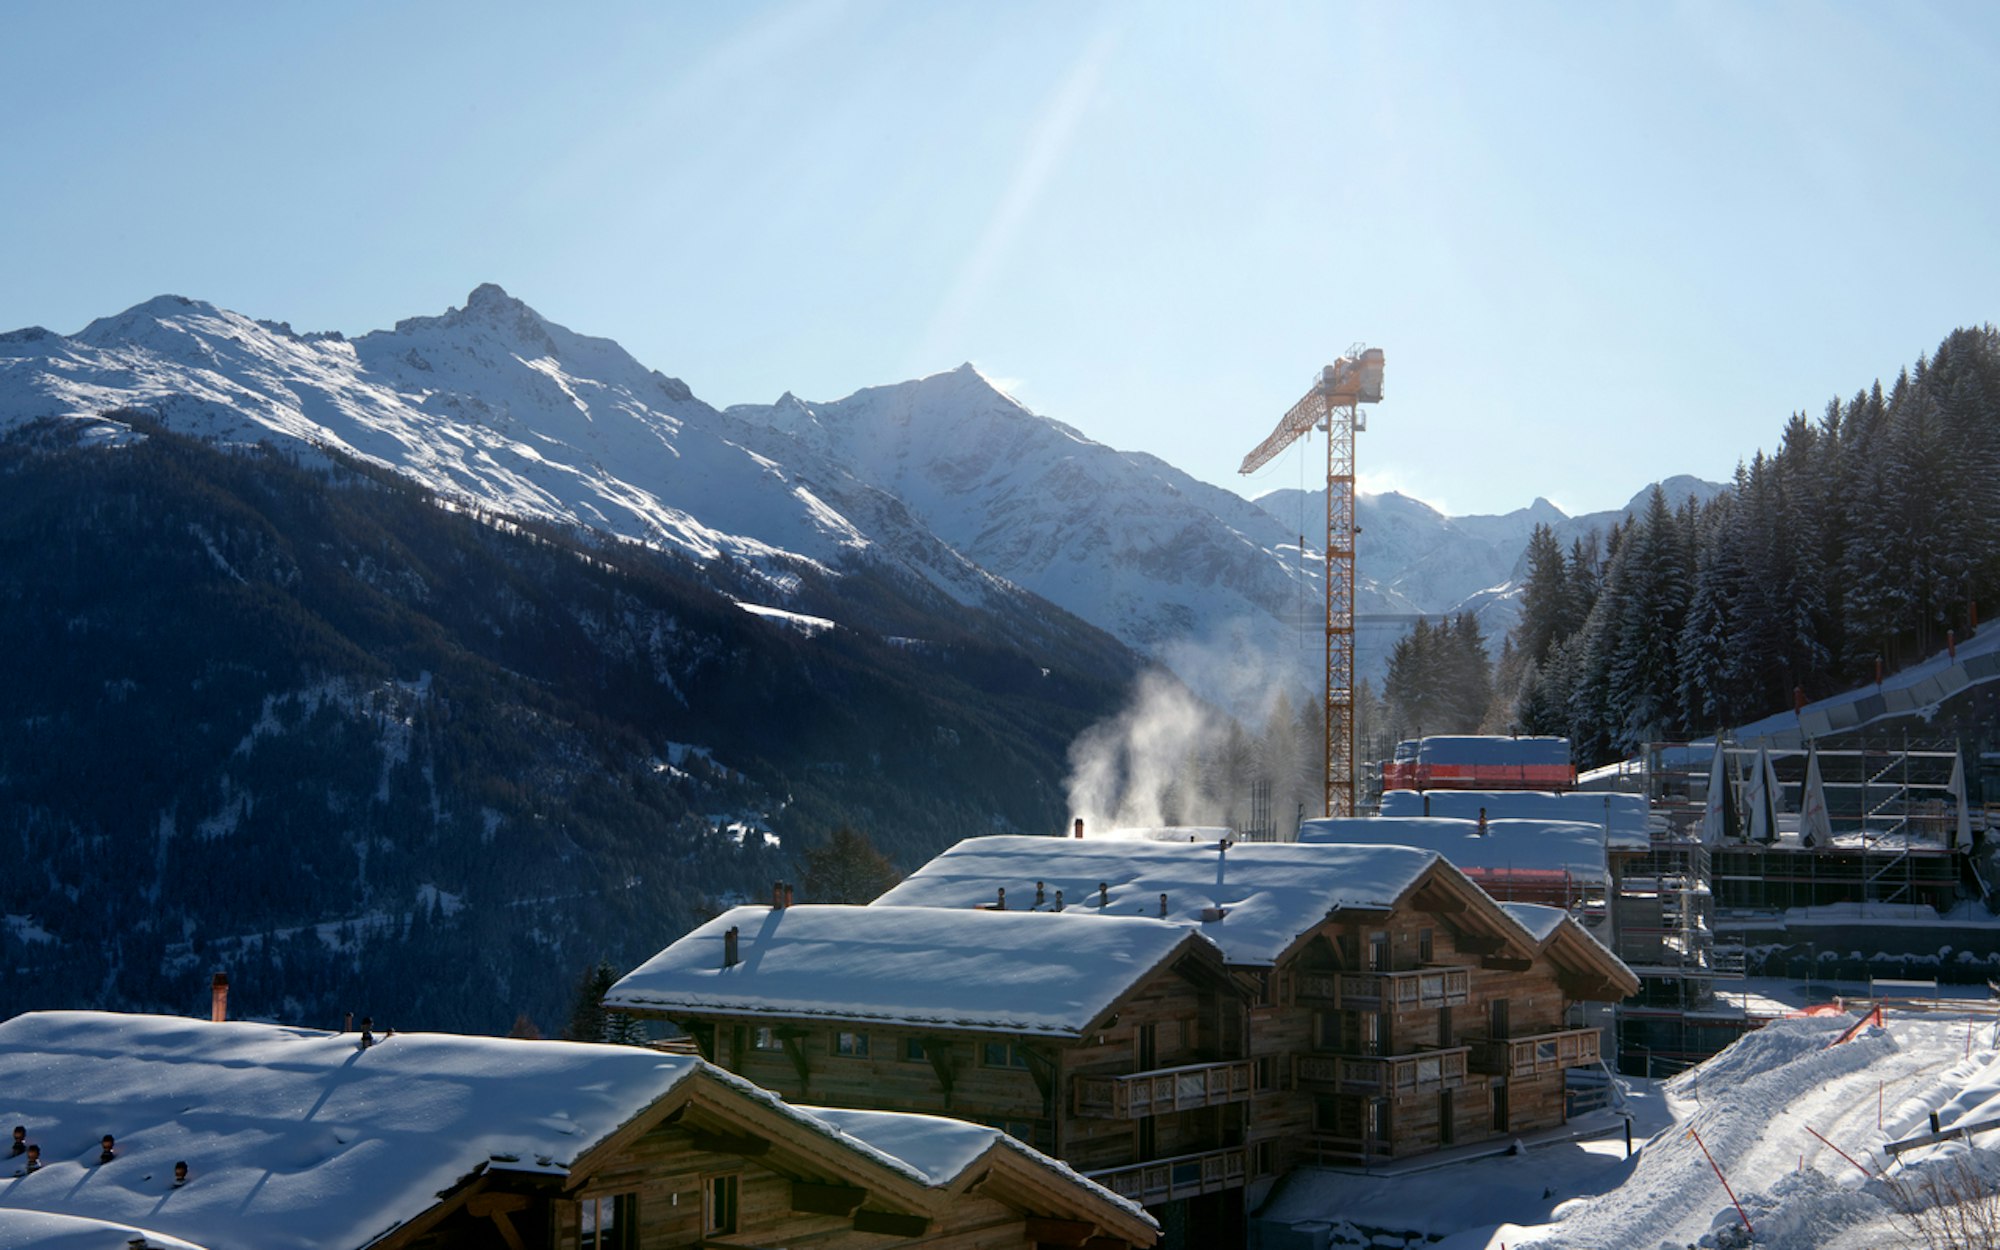 The advantages of buying a new build chalet or apartment in the Swiss Alps